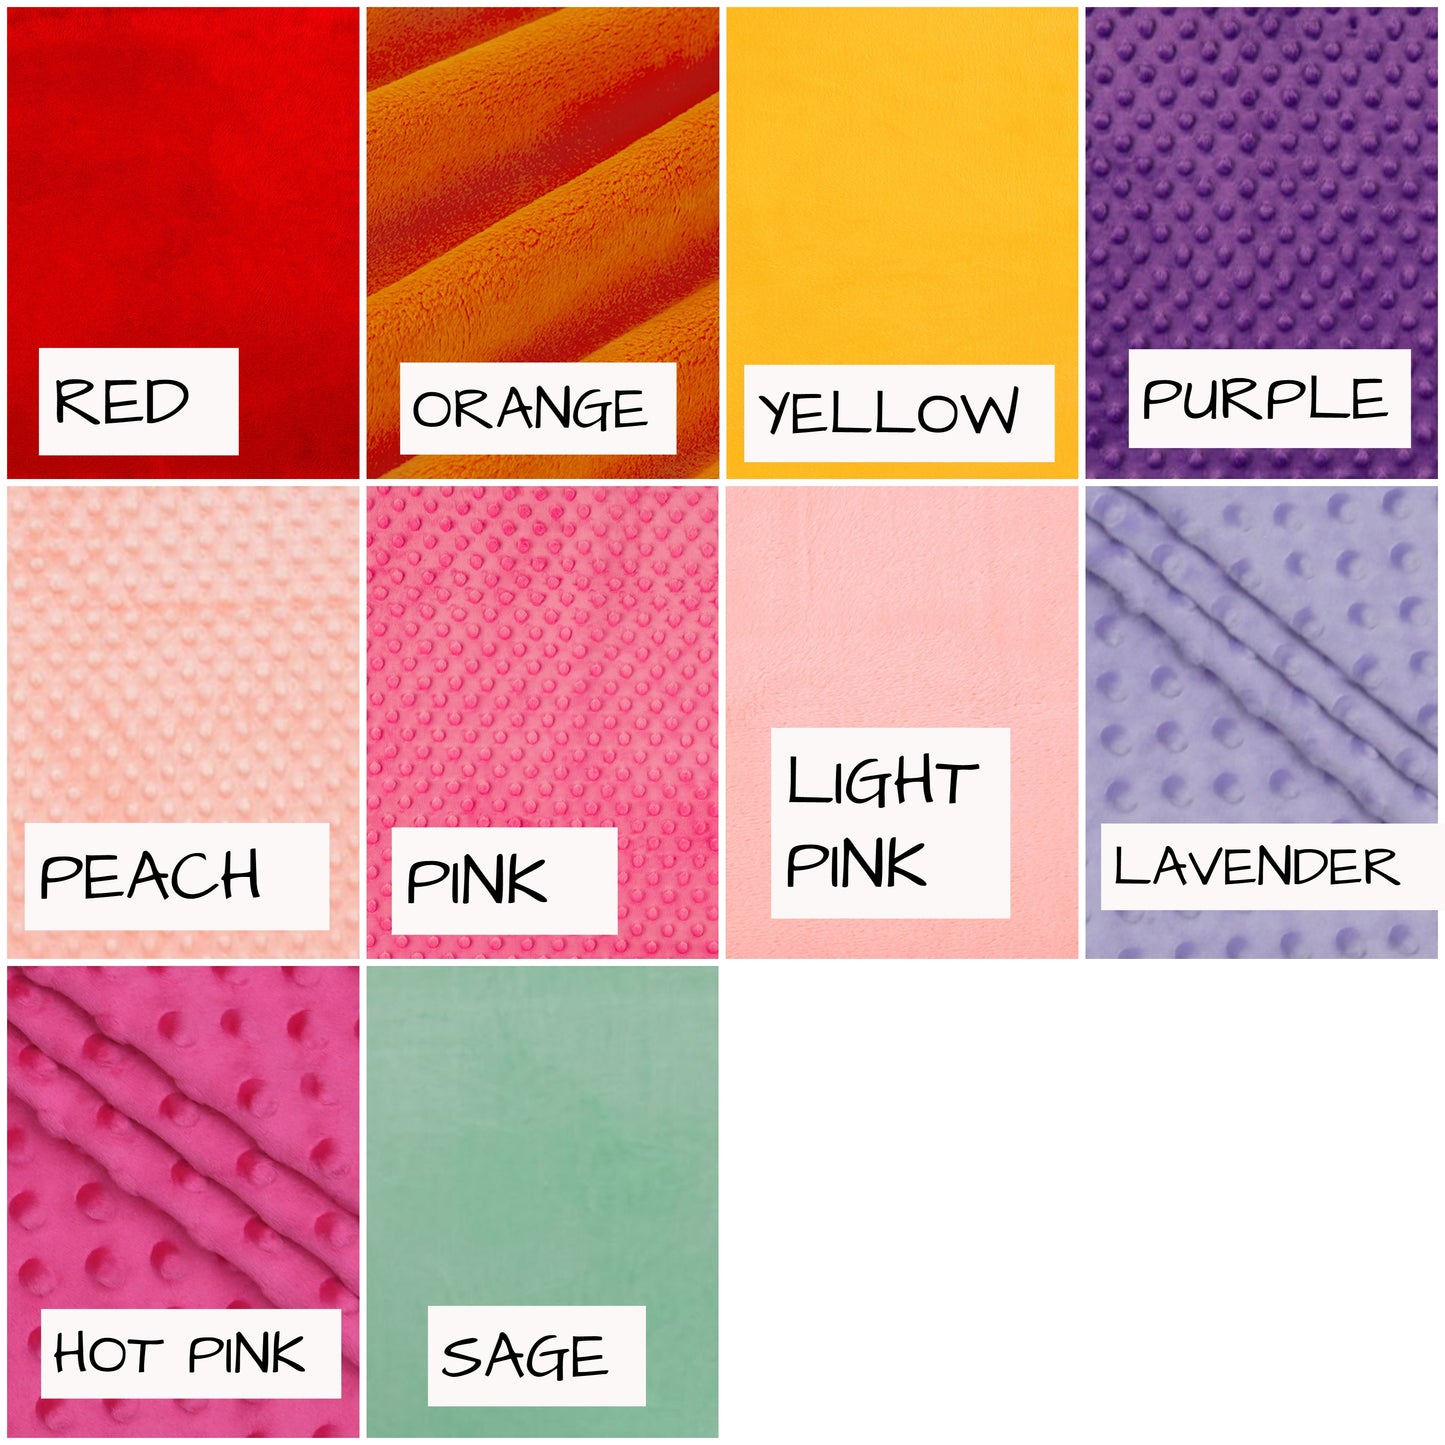 minky colors available for the pillow